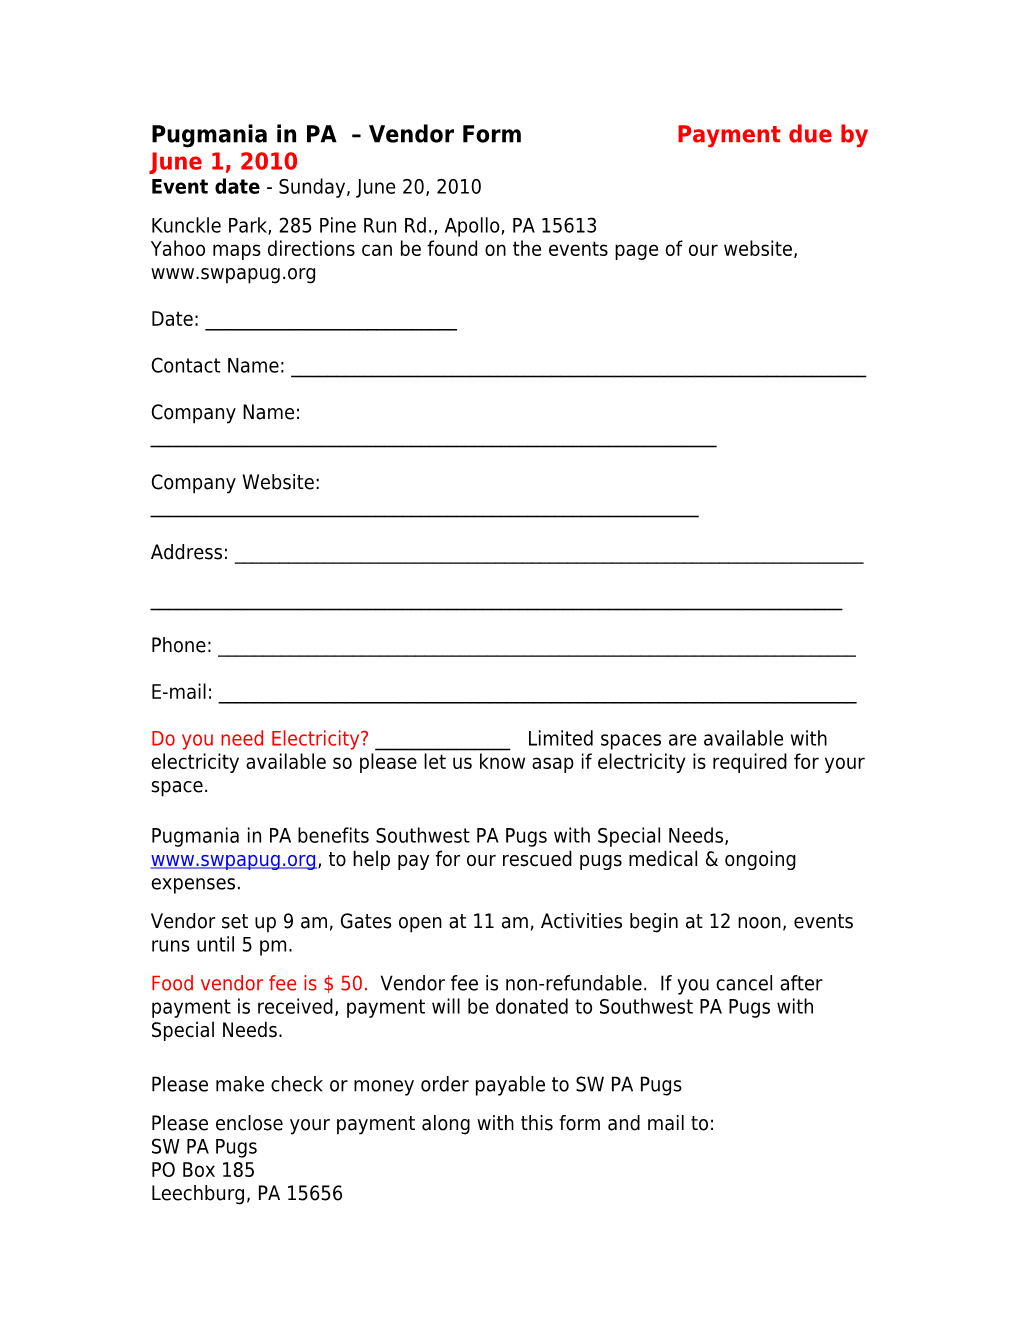 Pugmania in PA Vendor Form Payment Due by May 20, 2010